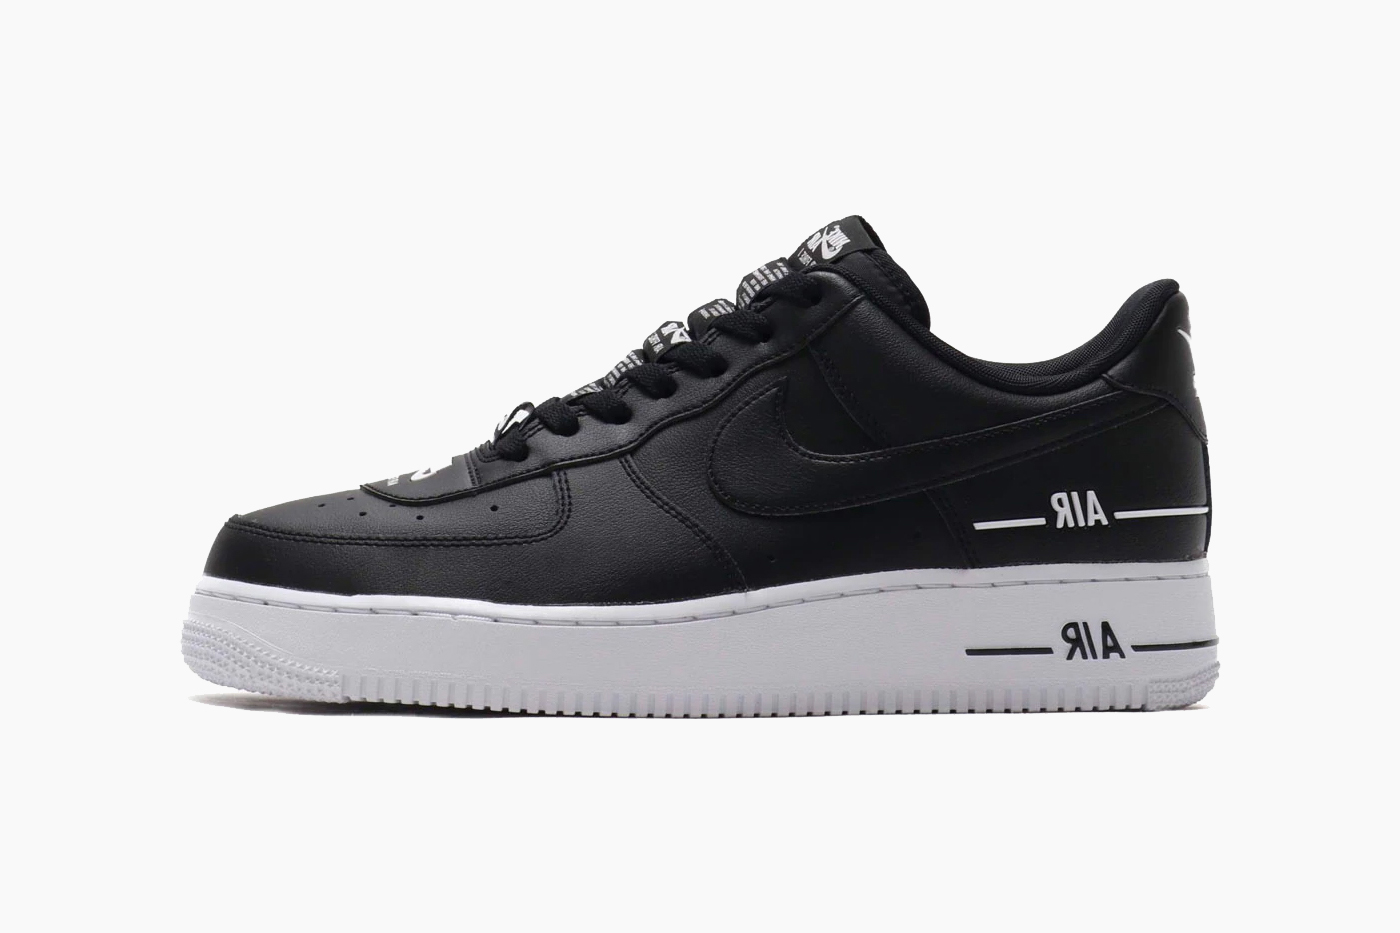 Nike Air Force 1 Low Receives Crisp White Iteration With Reflective Swooshes